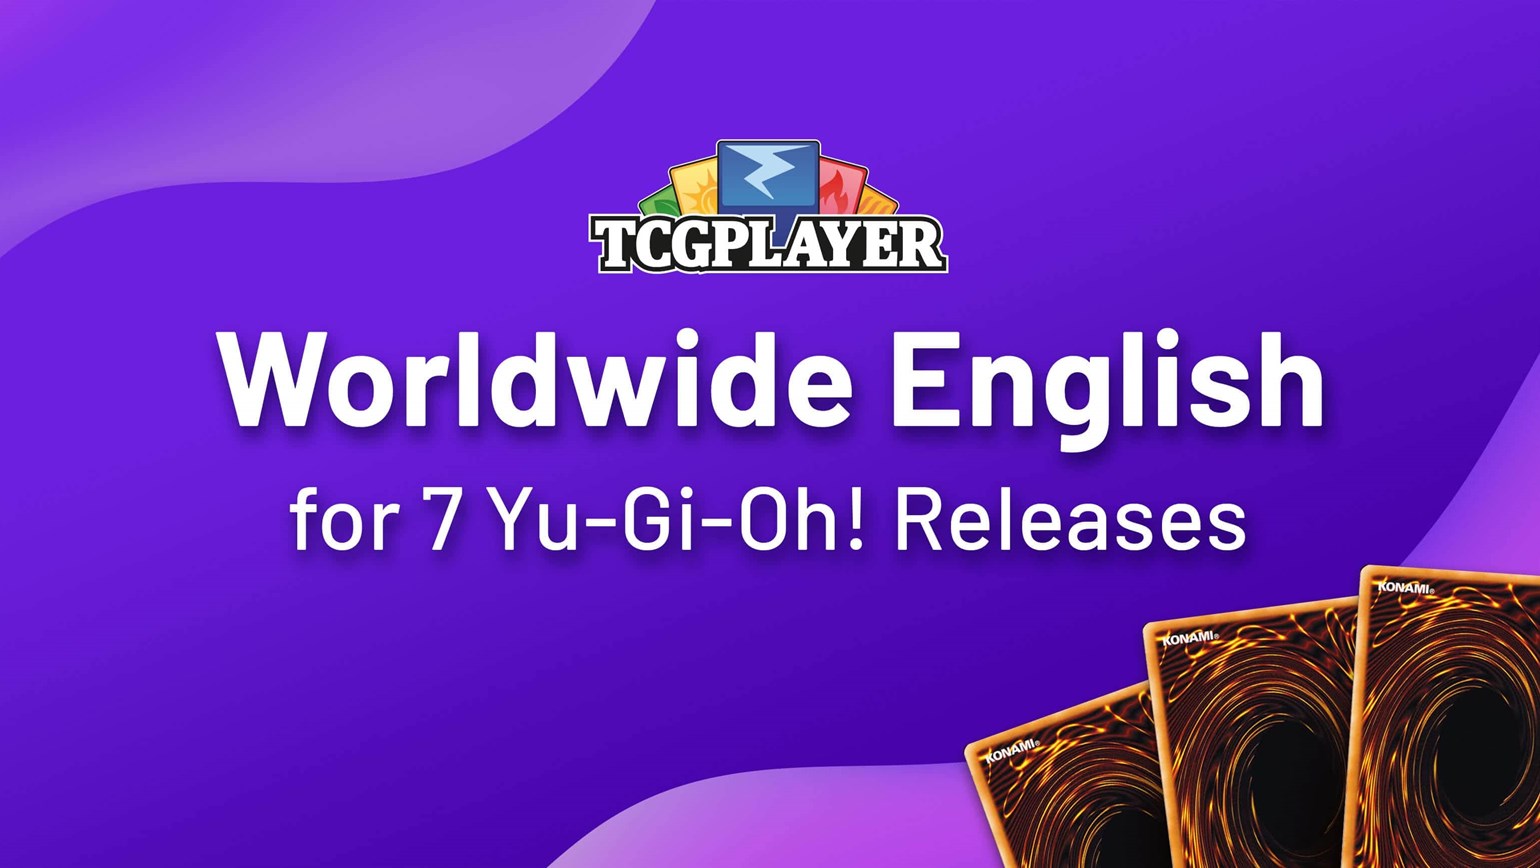 Catalog Update: Adding Worldwide English for 7 Yu-Gi-Oh! Releases